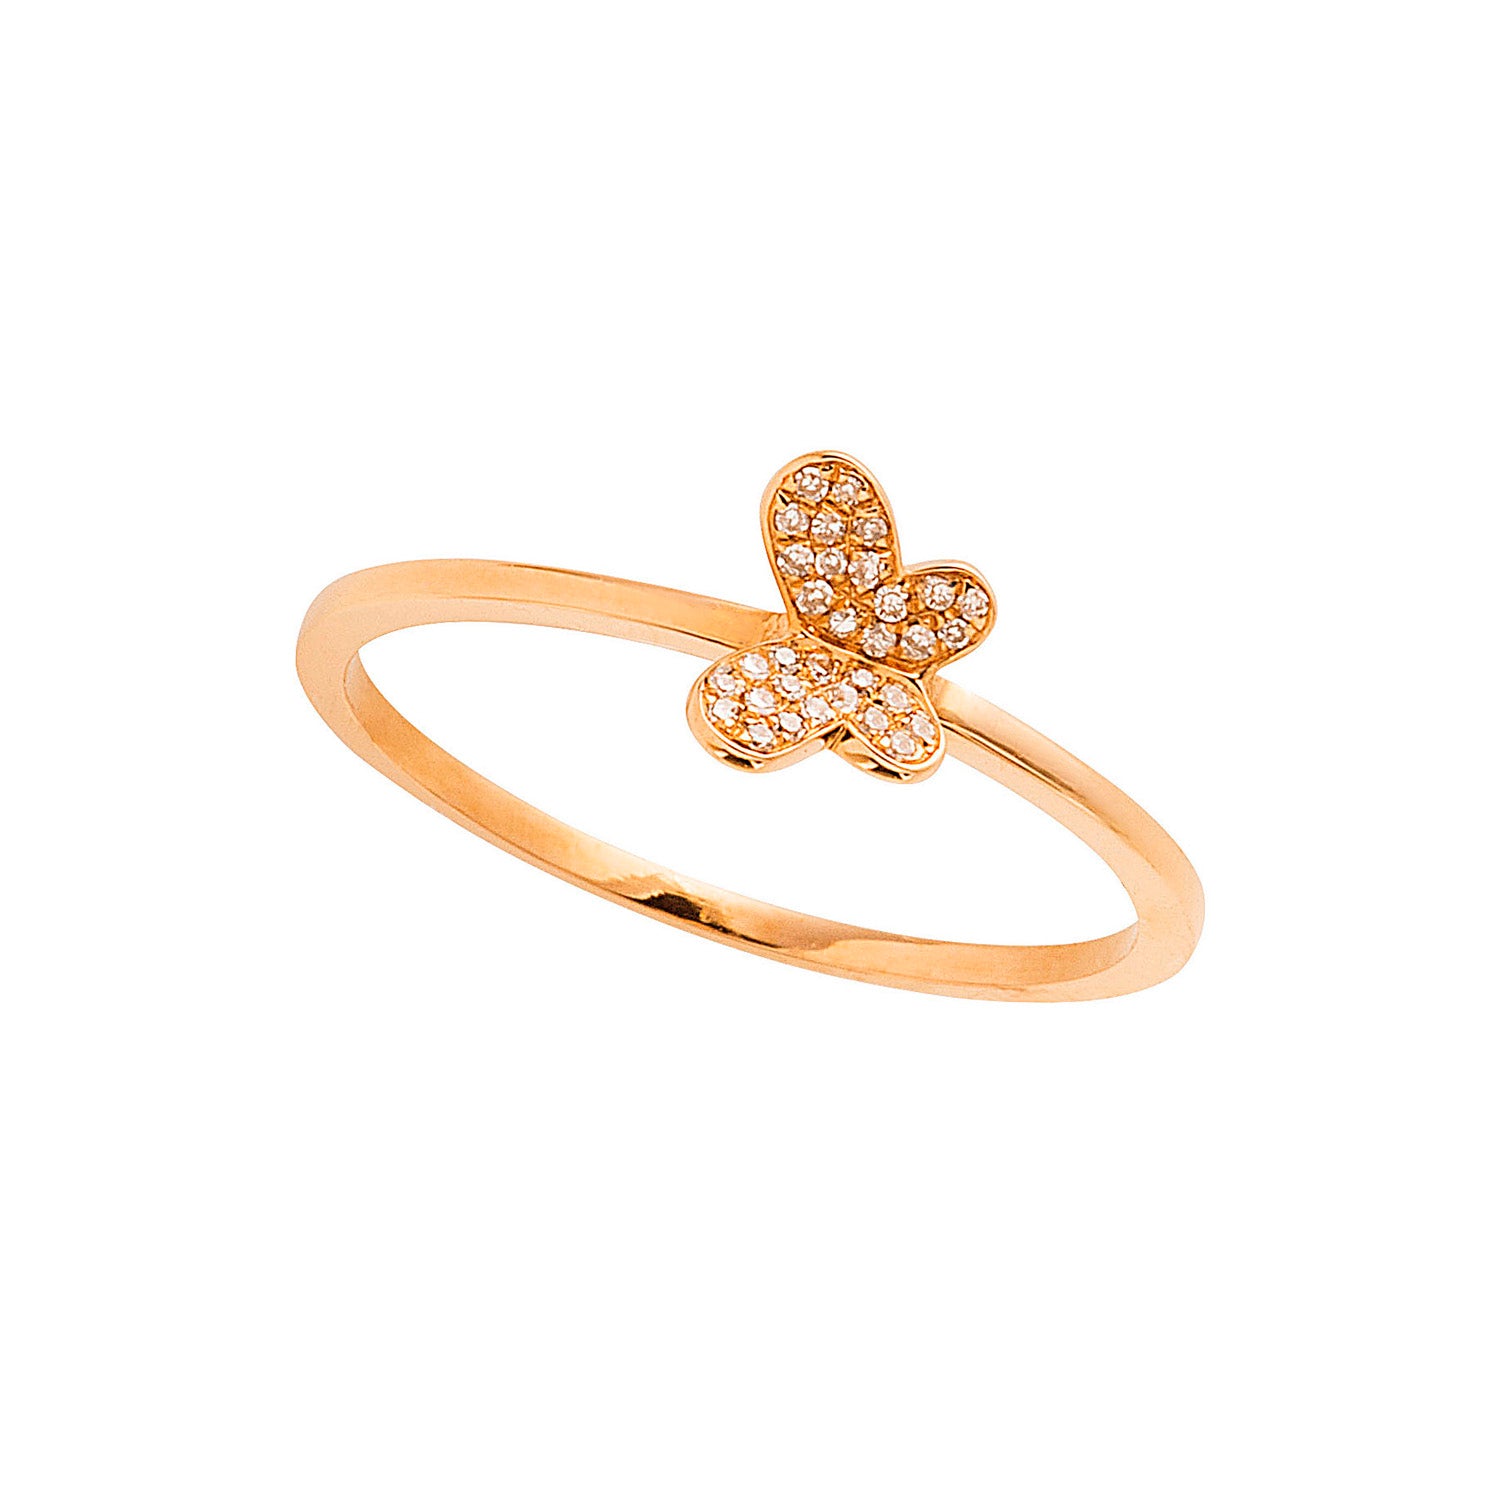 Butterfly gold ring with white diamonds. 